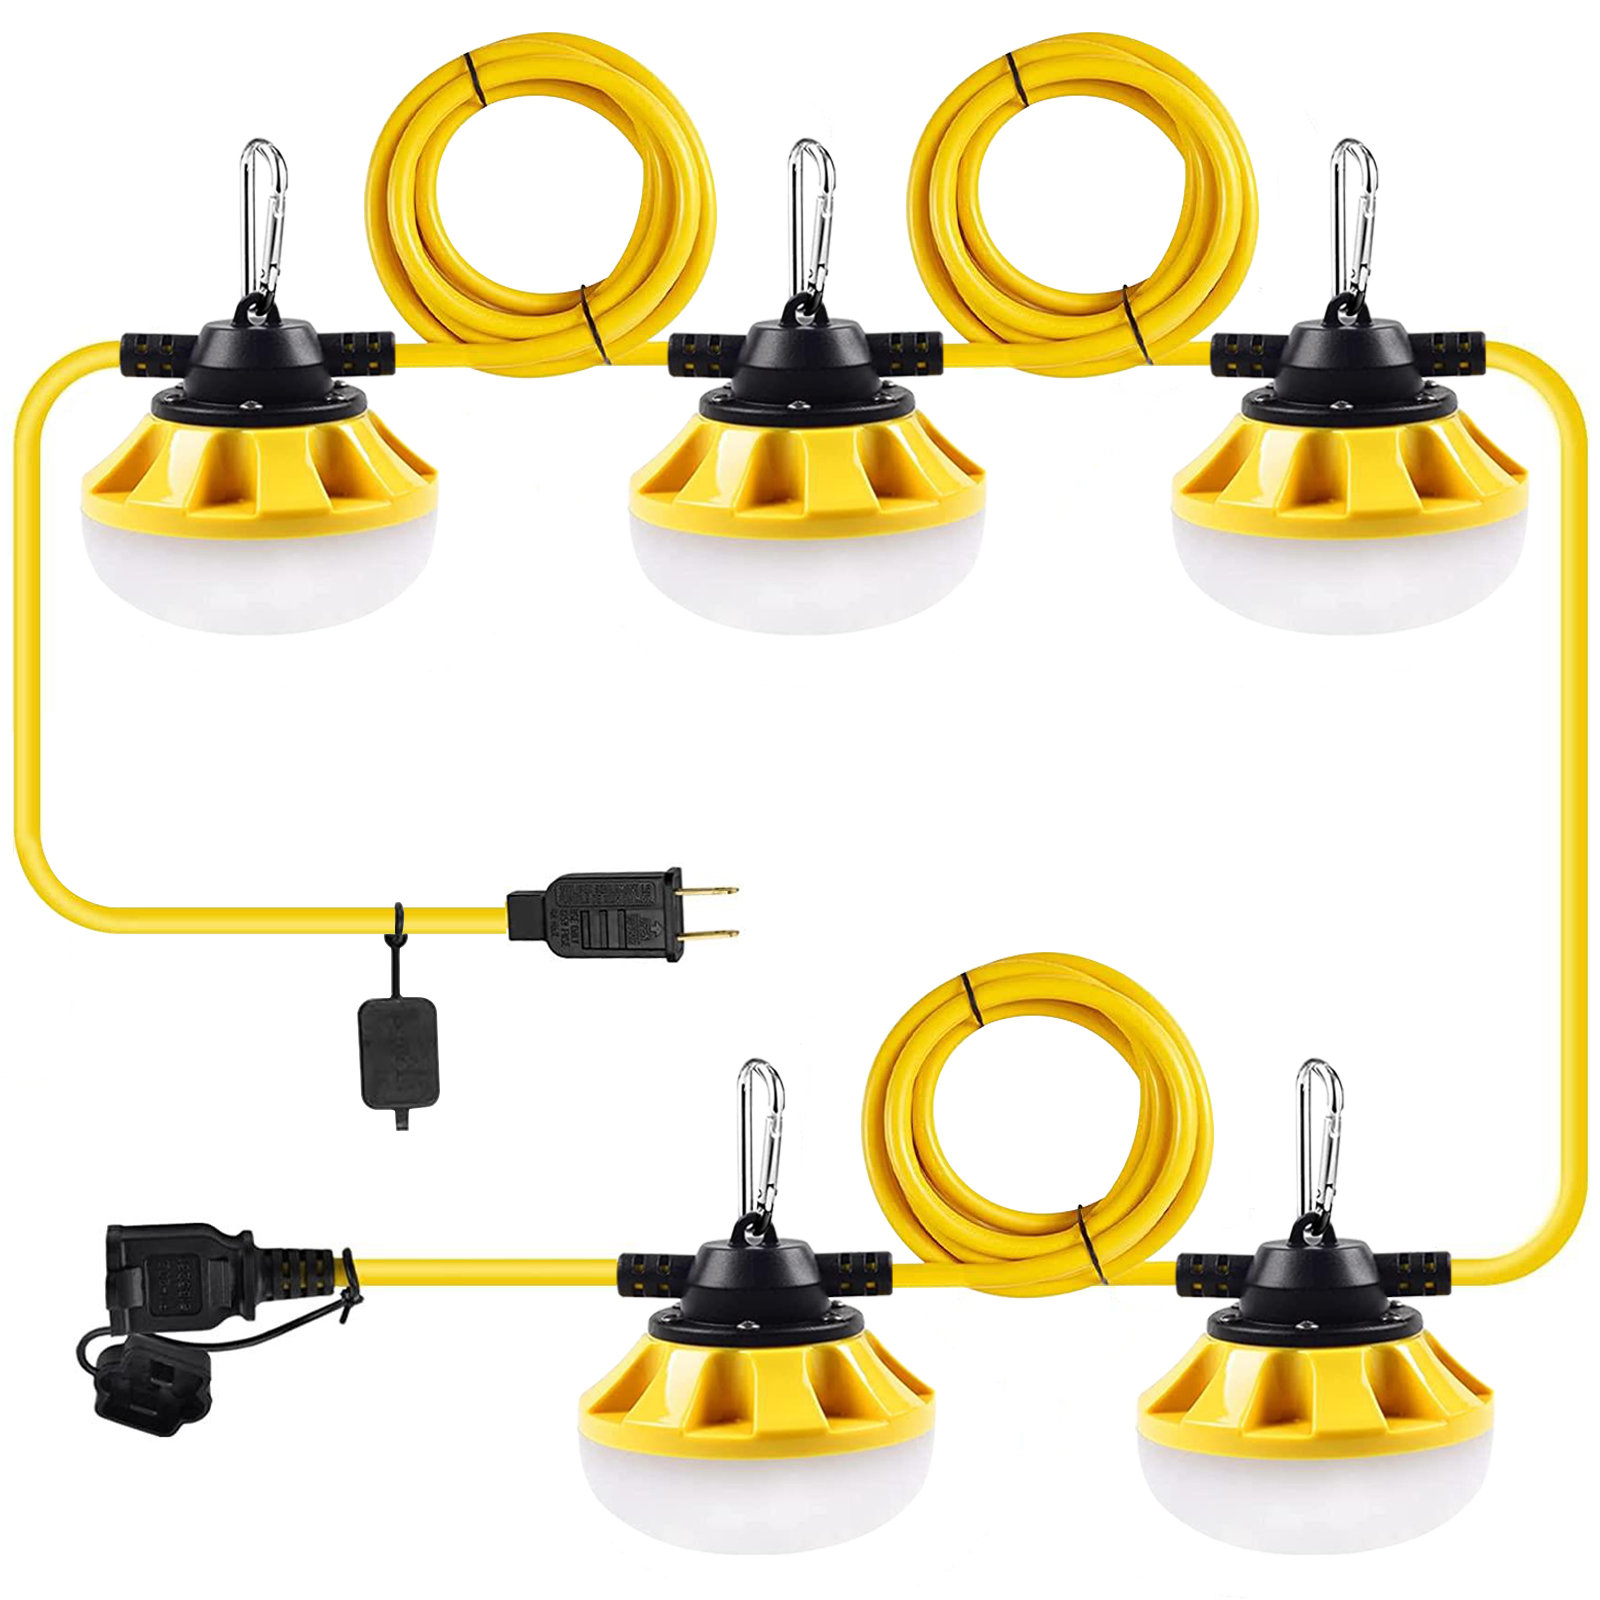 Avatar Controls 50FT Construction String Lights LED 50W 7000LM Industrial  Grade for Construction Sites Super Bright